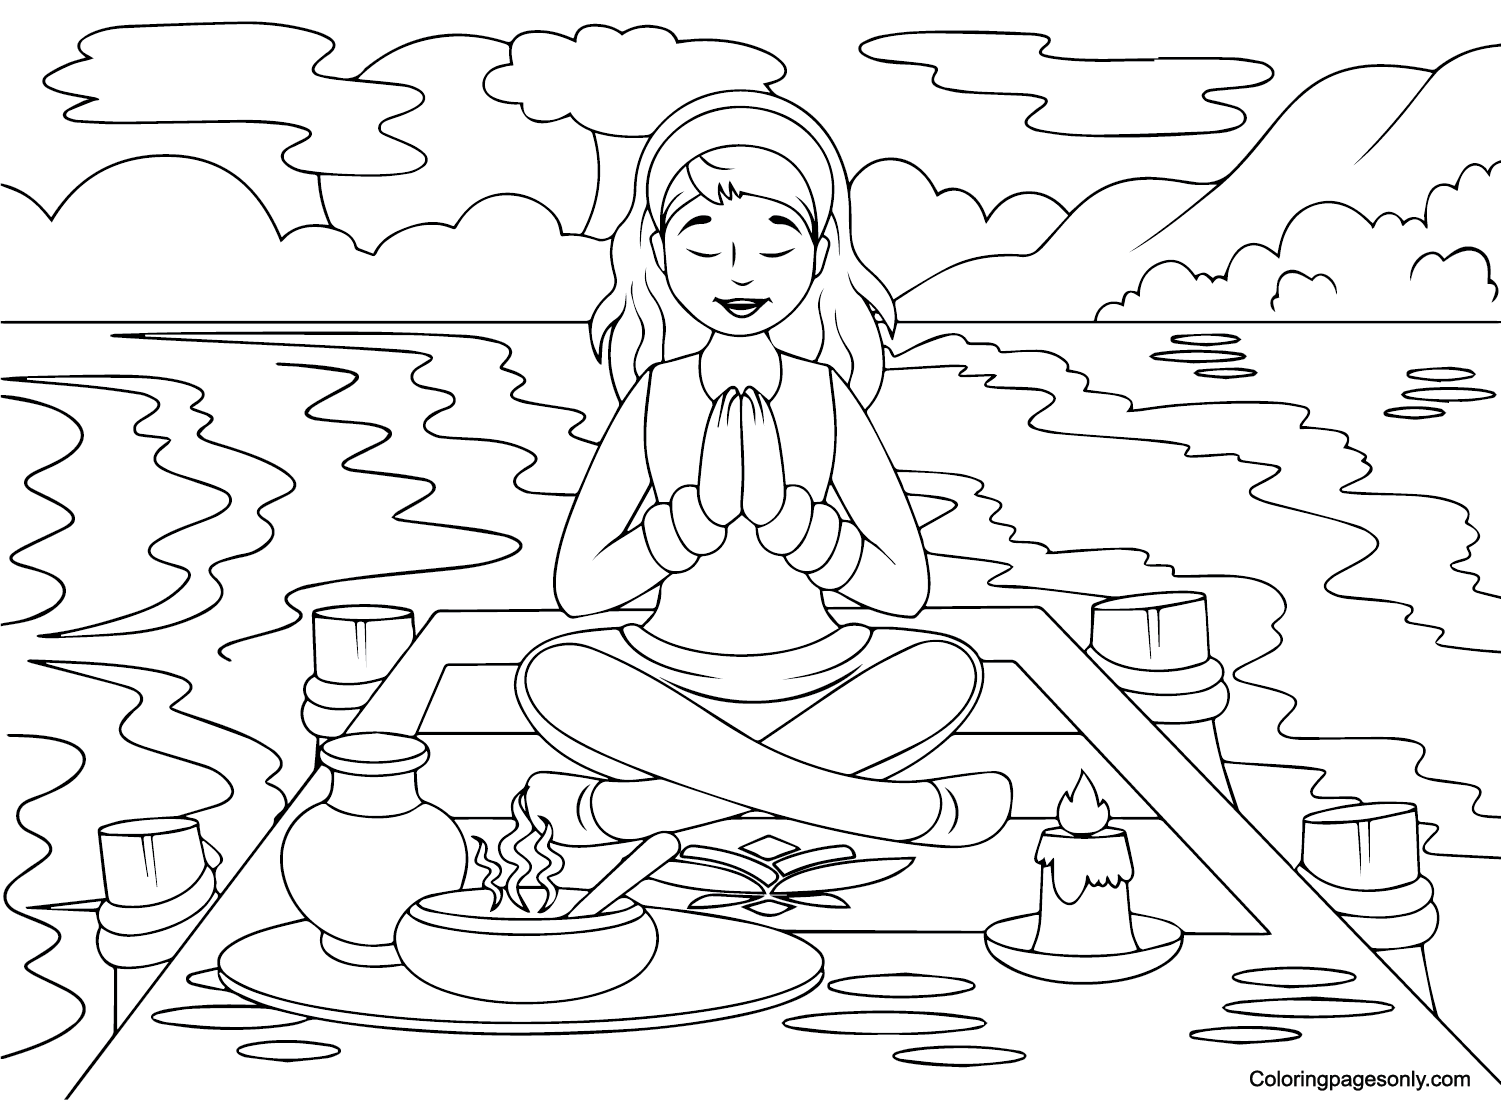 Images Mindfulness Coloring Page